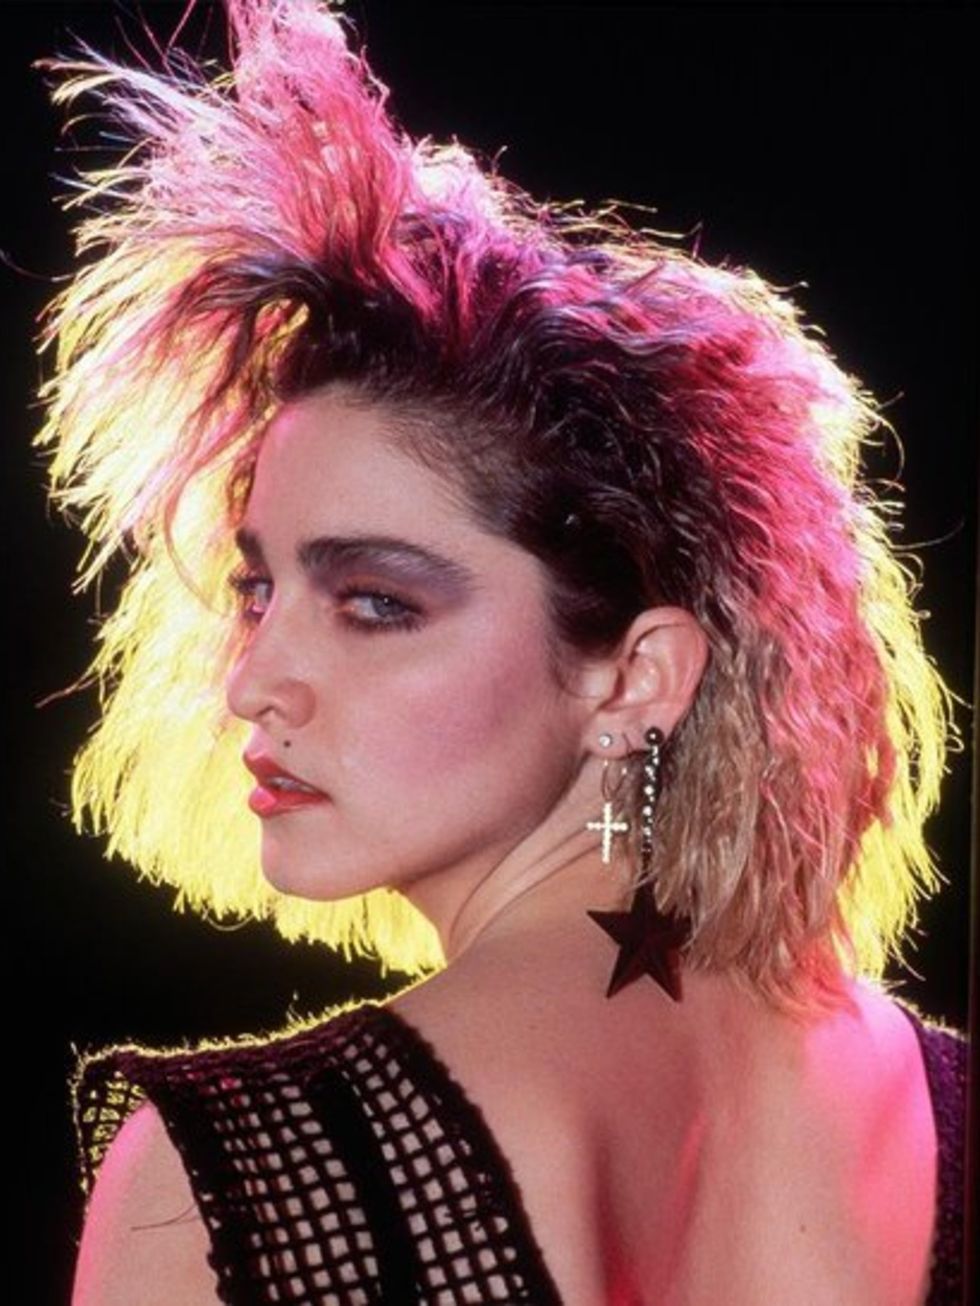 1983
A grunge-punk look for her Lucky Star video